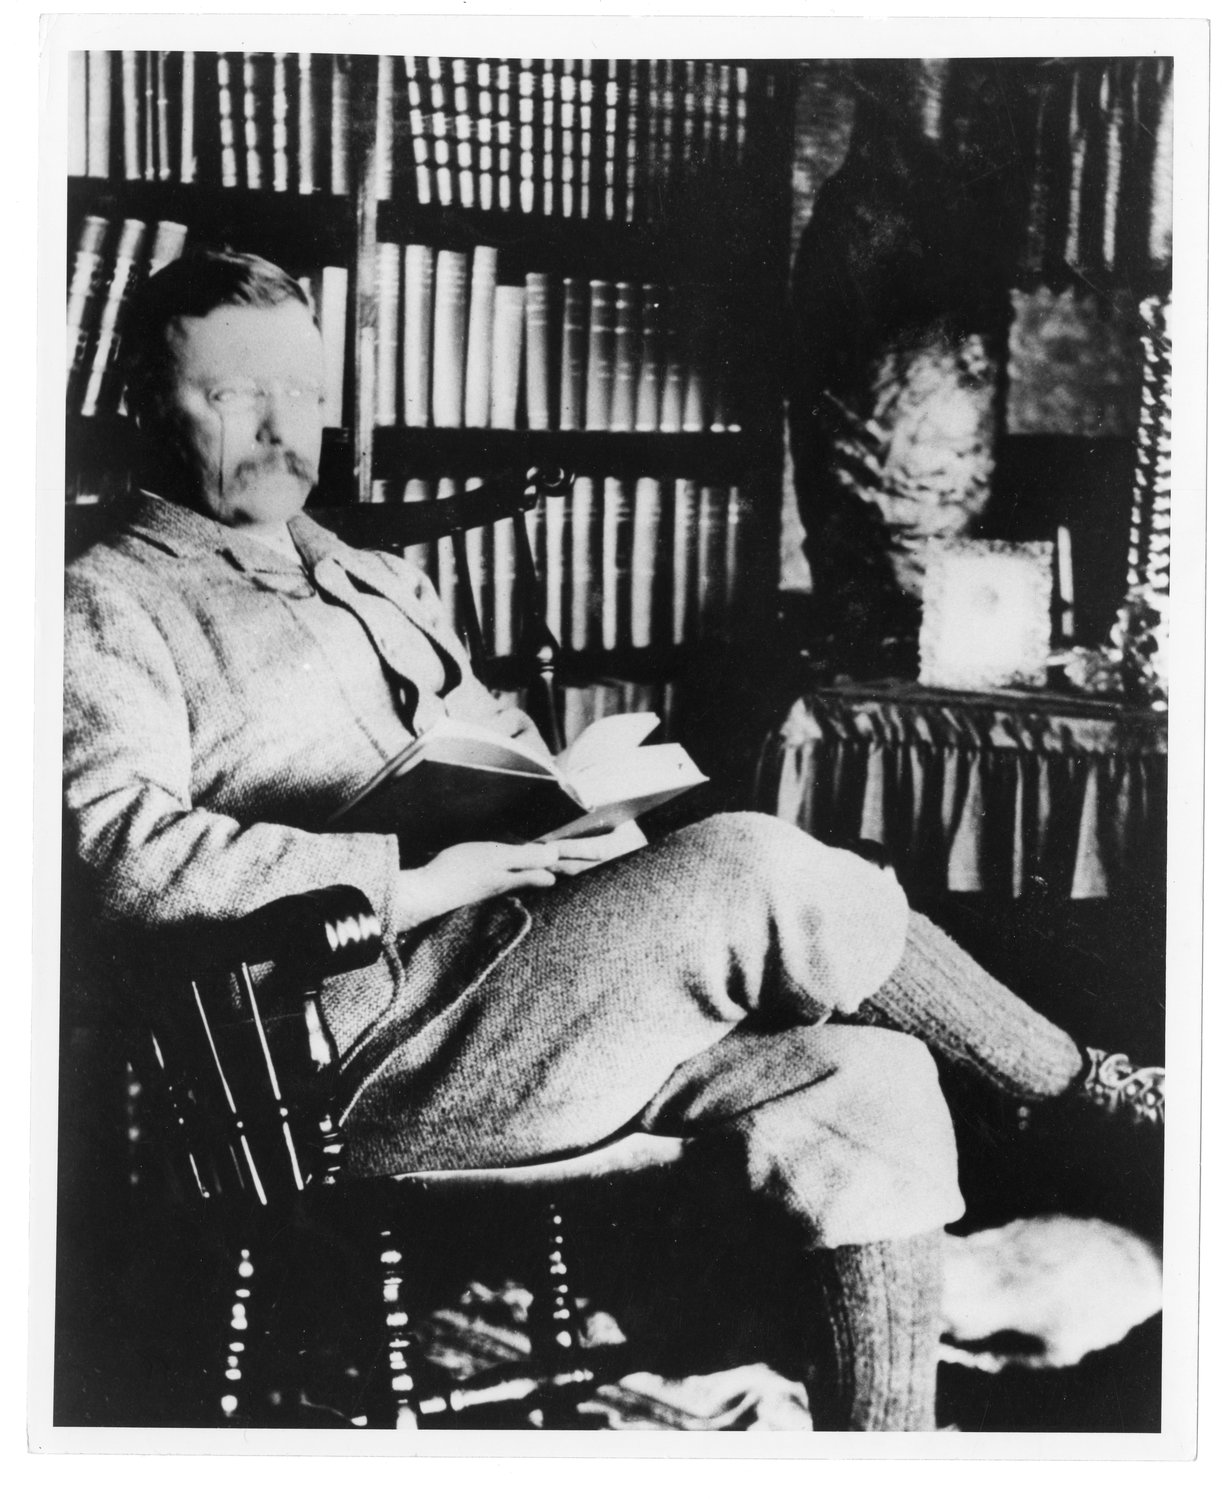 President Theodore Roosevelt believed that education was important. He read a book a day to further his own education.